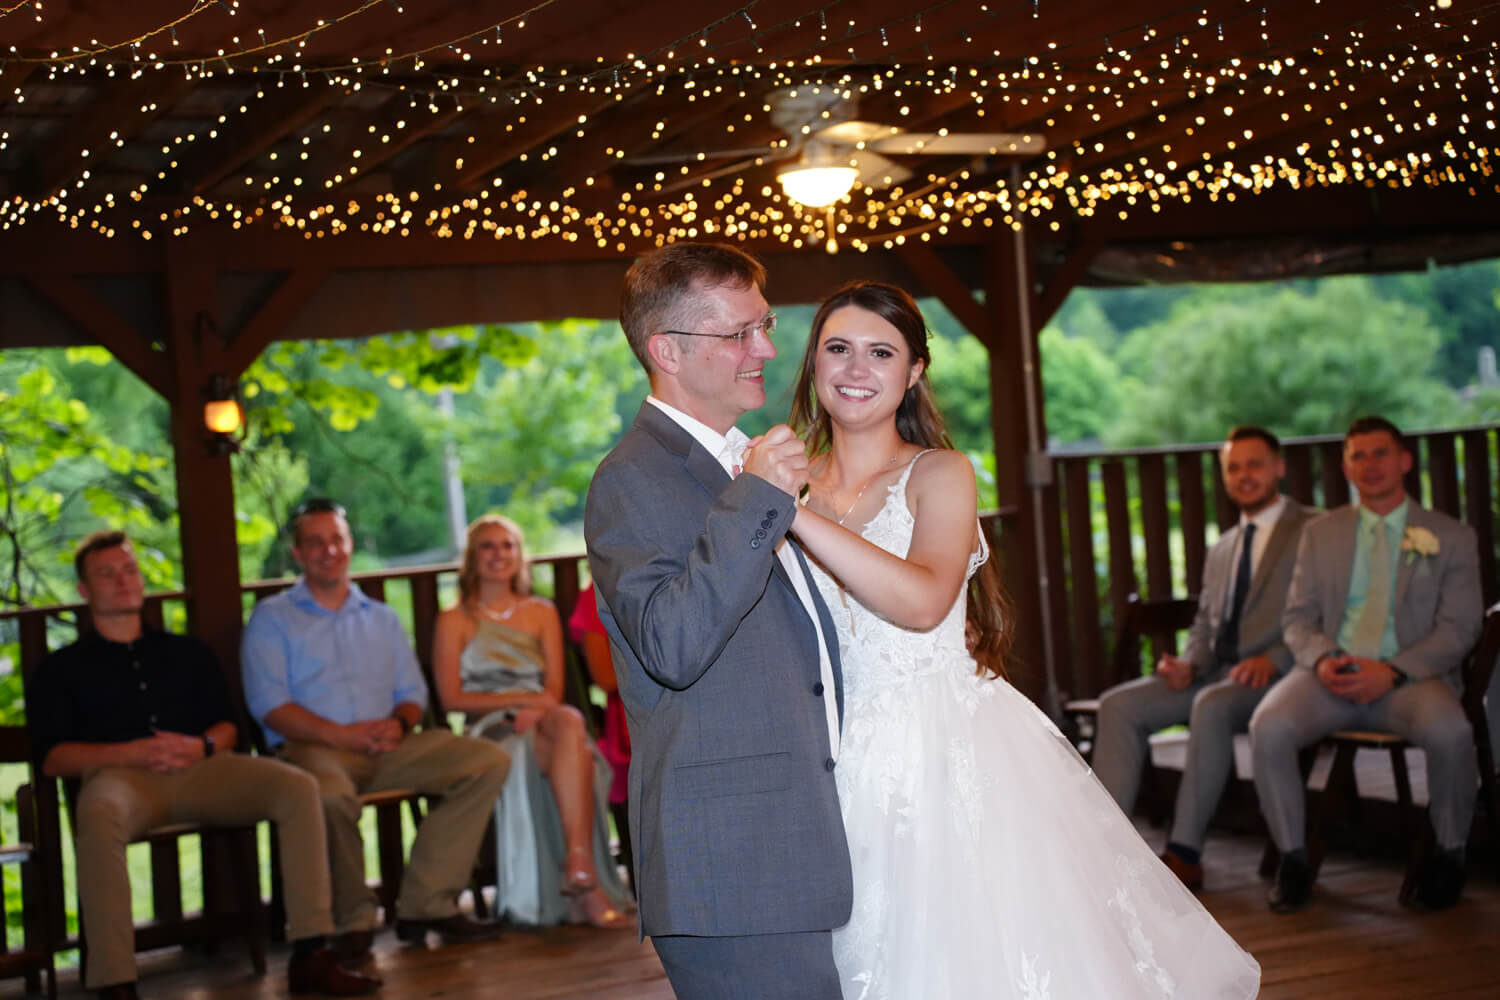 Father daughter dance on wedding day in a pavilion with pretty fairy lights on the ceiling and guests watching in the background